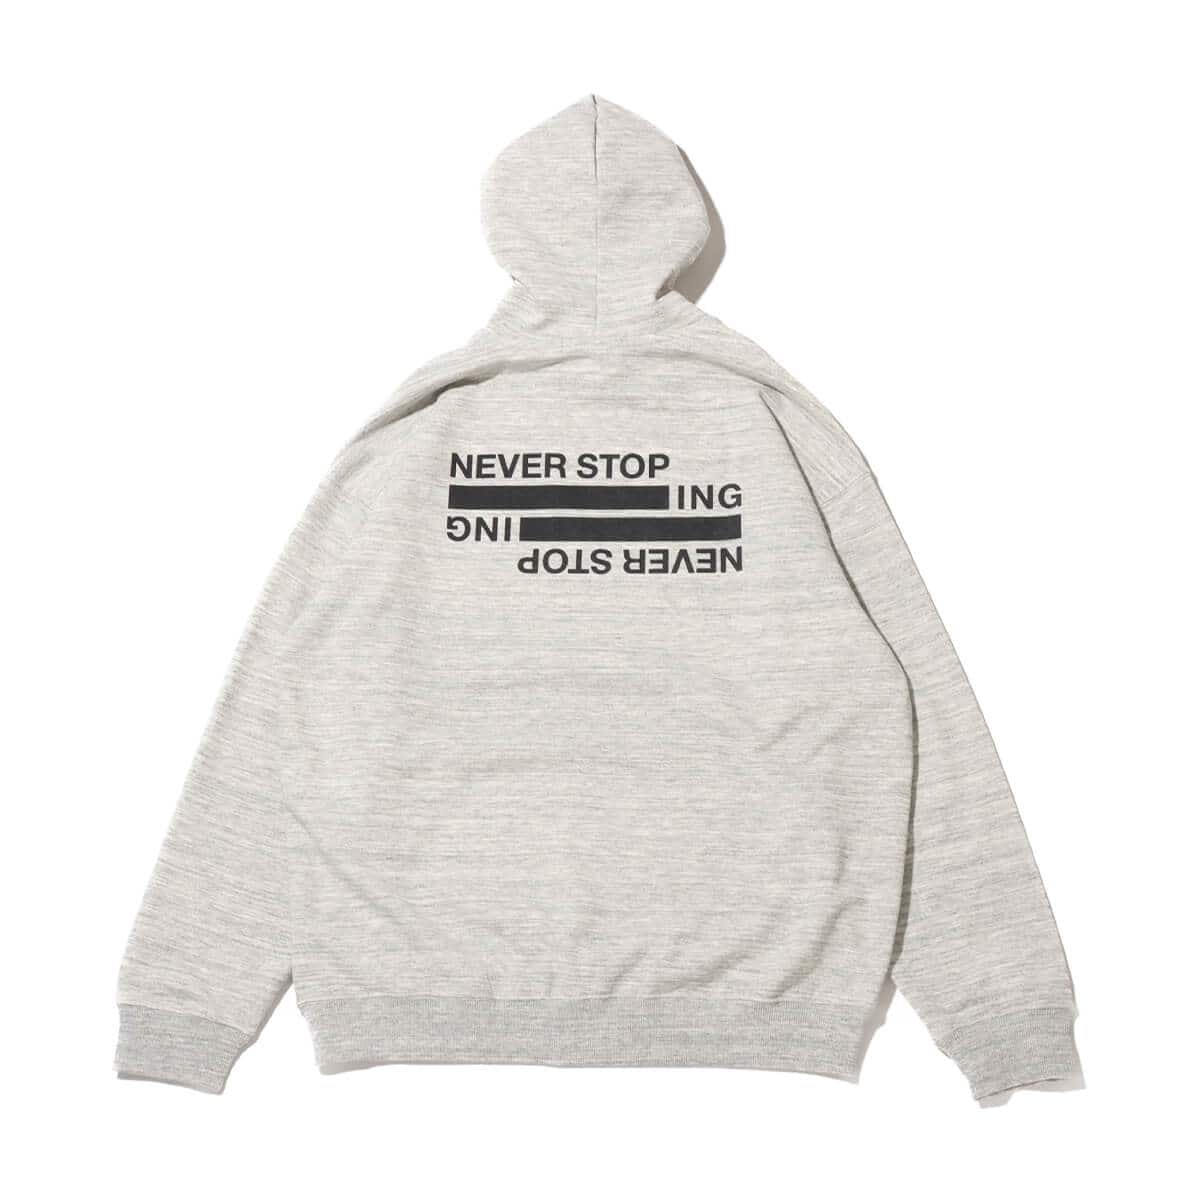 THE NORTH FACE NEVER STOP ING Hoodie ミックスグレー 24SS-I